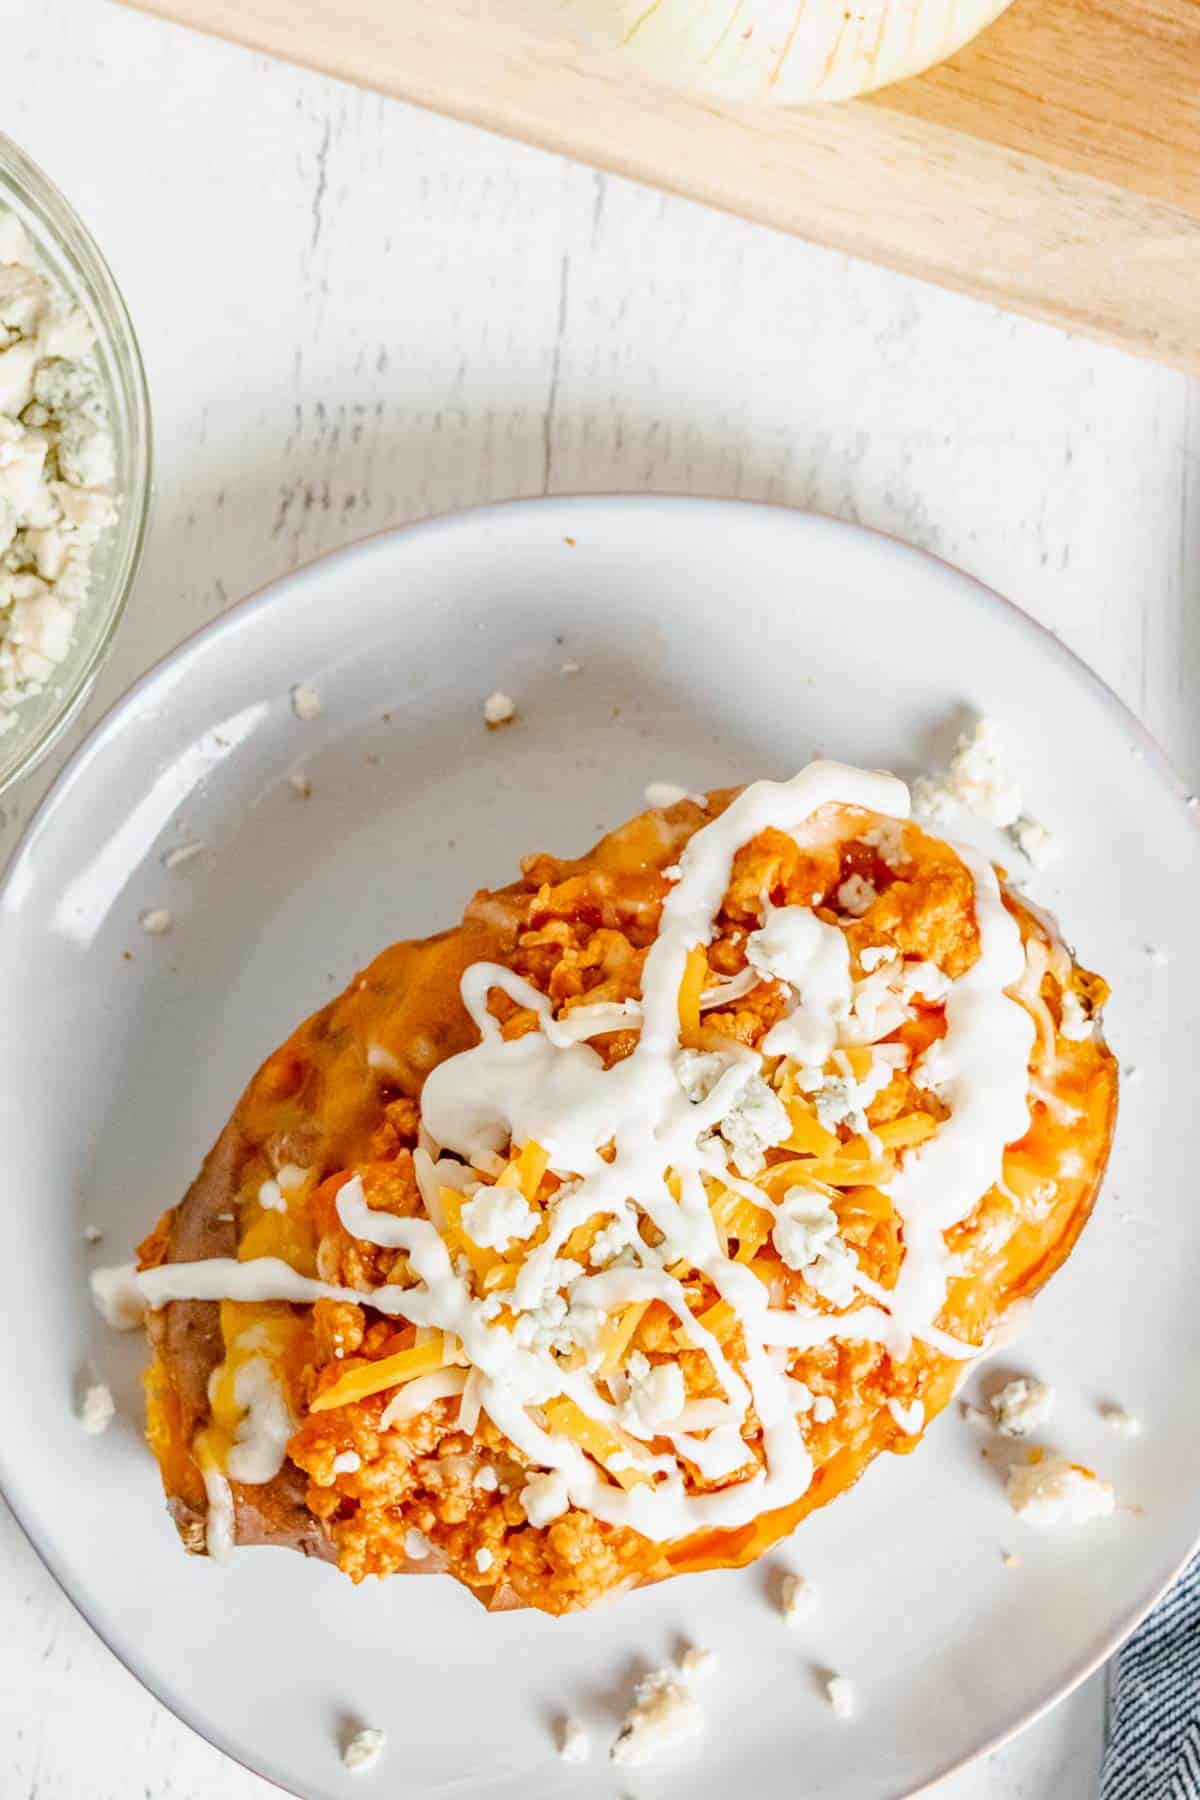 A baked sweet potato stuffed with cheese and buffalo chicken and topped with blue cheese crumbles and a drizzle of Ranch dressing.